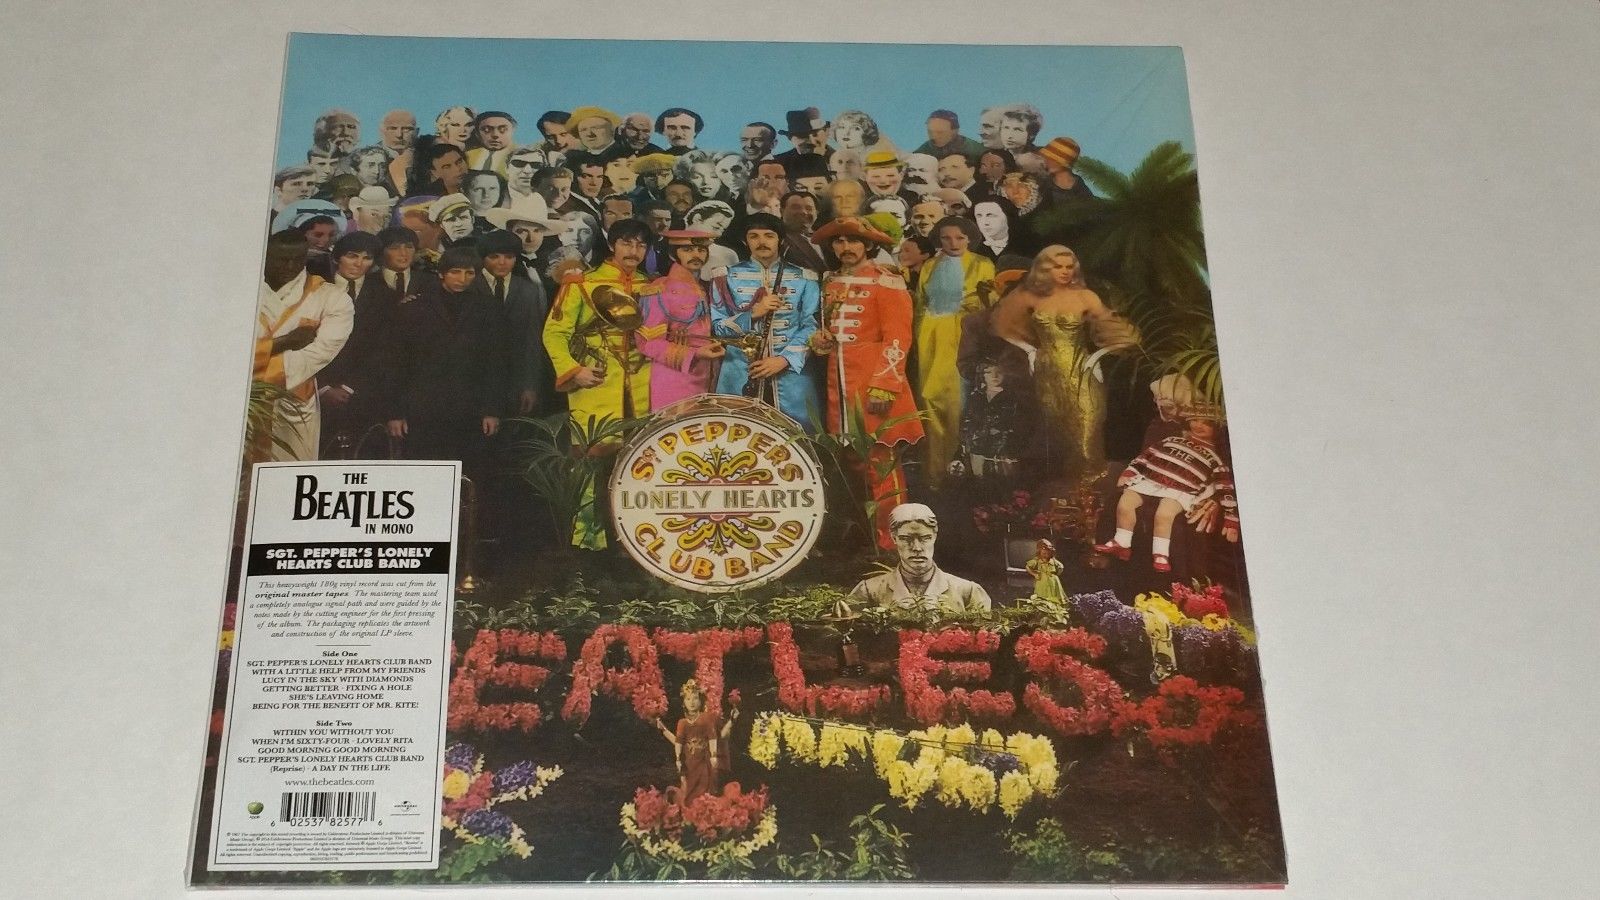 popsike.com - THE BEATLES SGT. PEPPERS LONELY HEARTS CLUB BAND 180